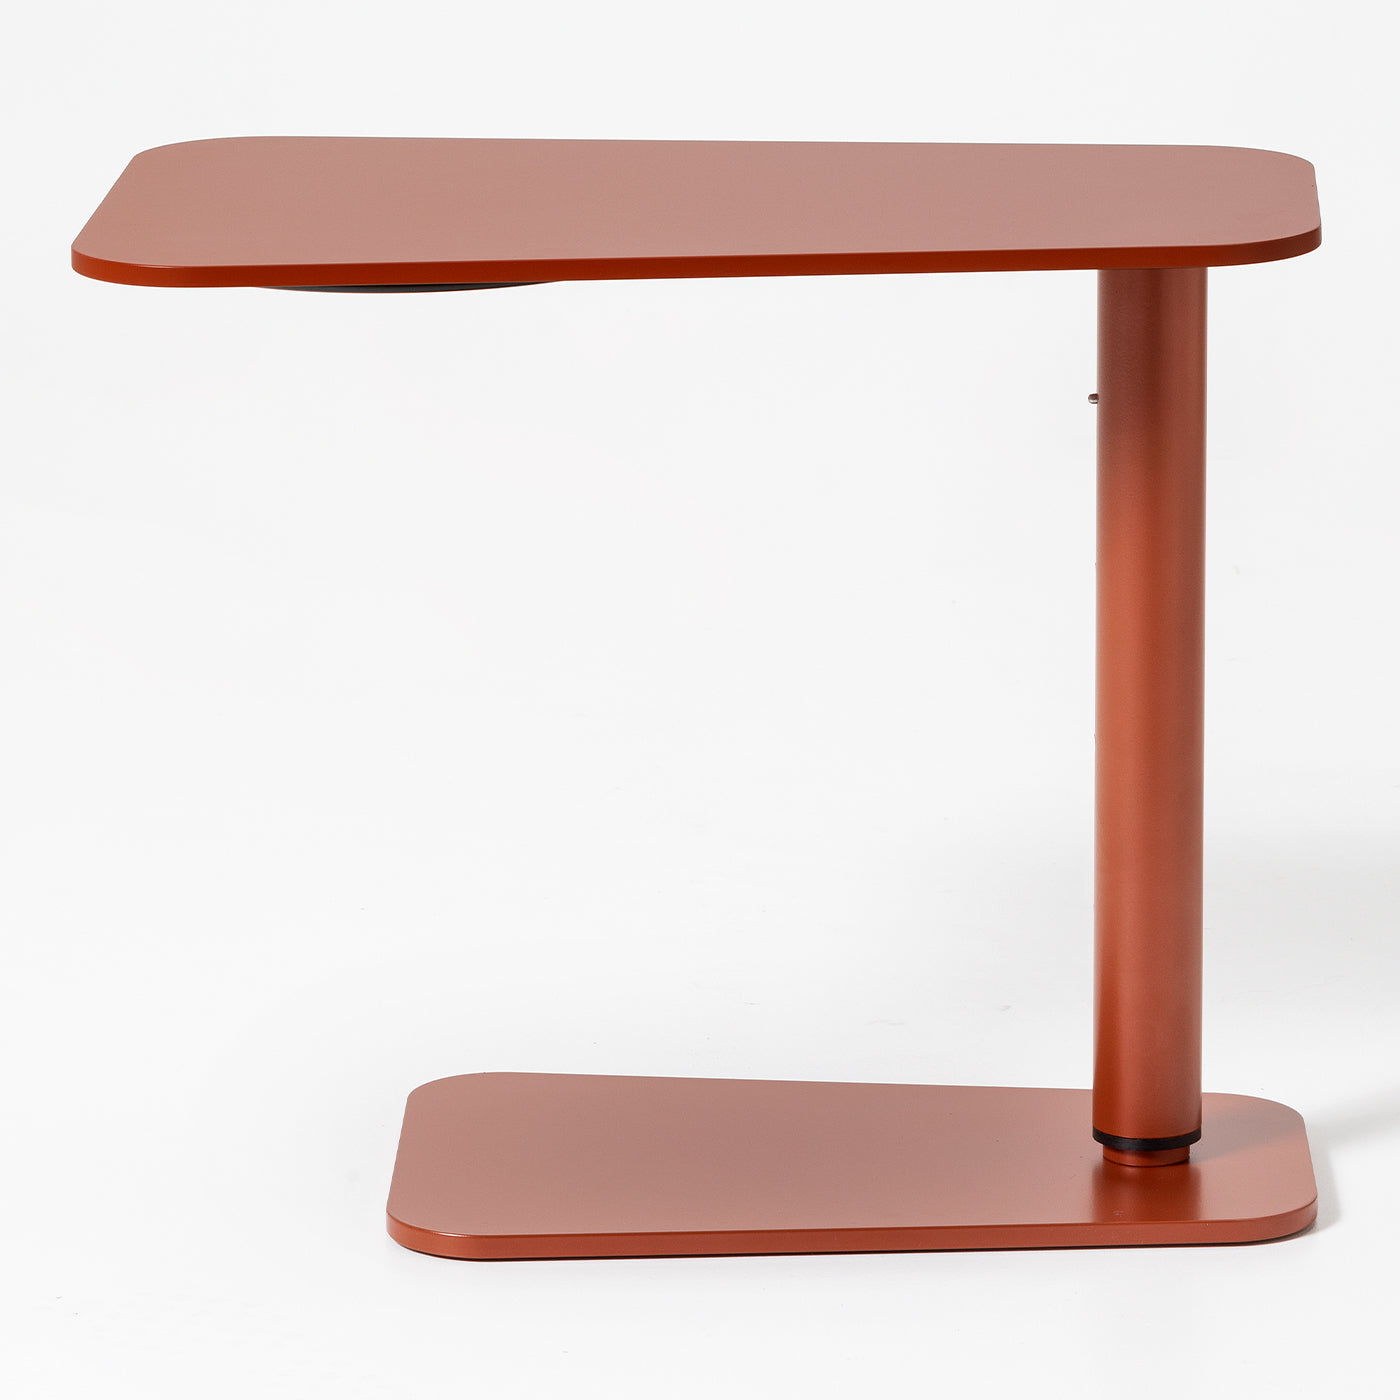 0130 Jens Red Side Table by Massimo Broglio - Alternative view 3